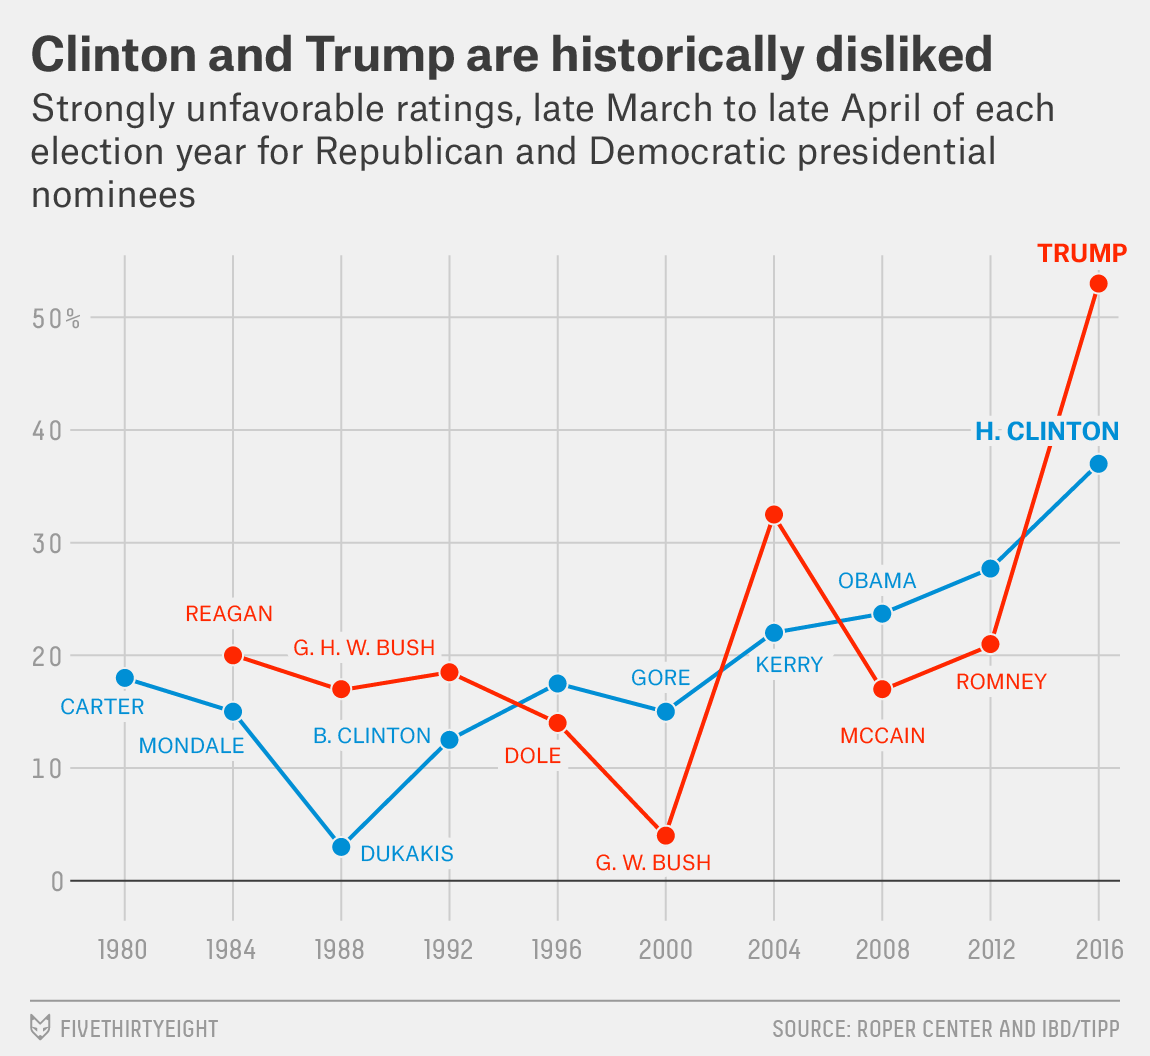 Source: FiveThirtyEight (http://fivethirtyeight.com/features/americans-distaste-for-both-trump-and-clinton-is-record-breaking/)